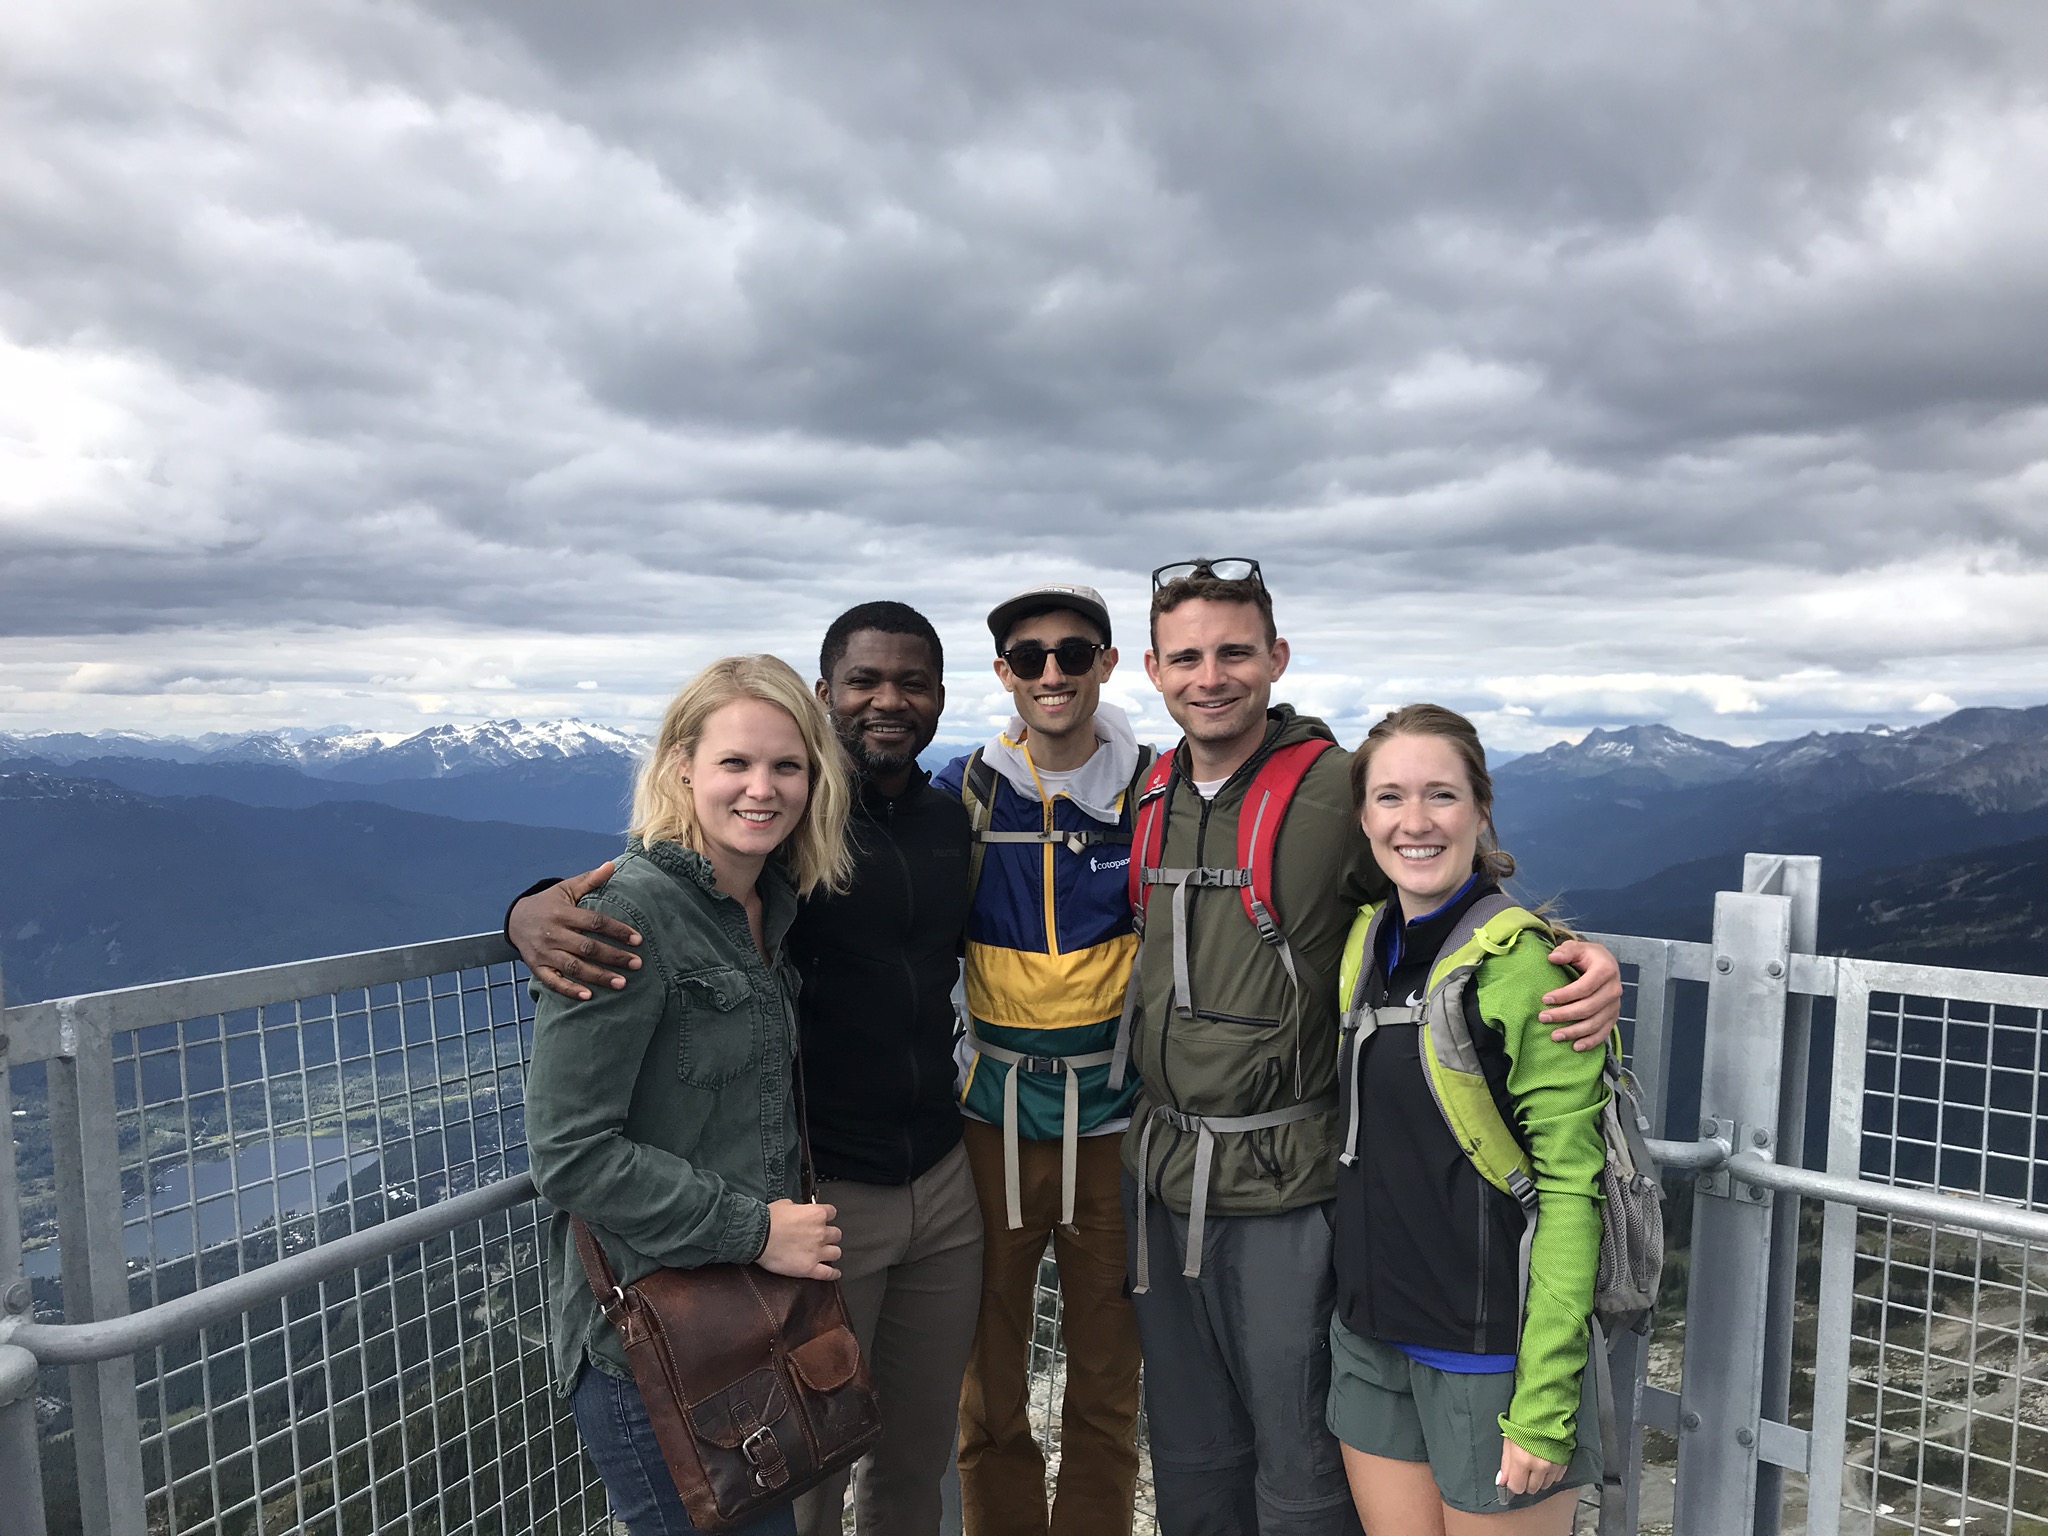 Diagnostic Radiology Residents having fun outside of work on a very high viewing tower.